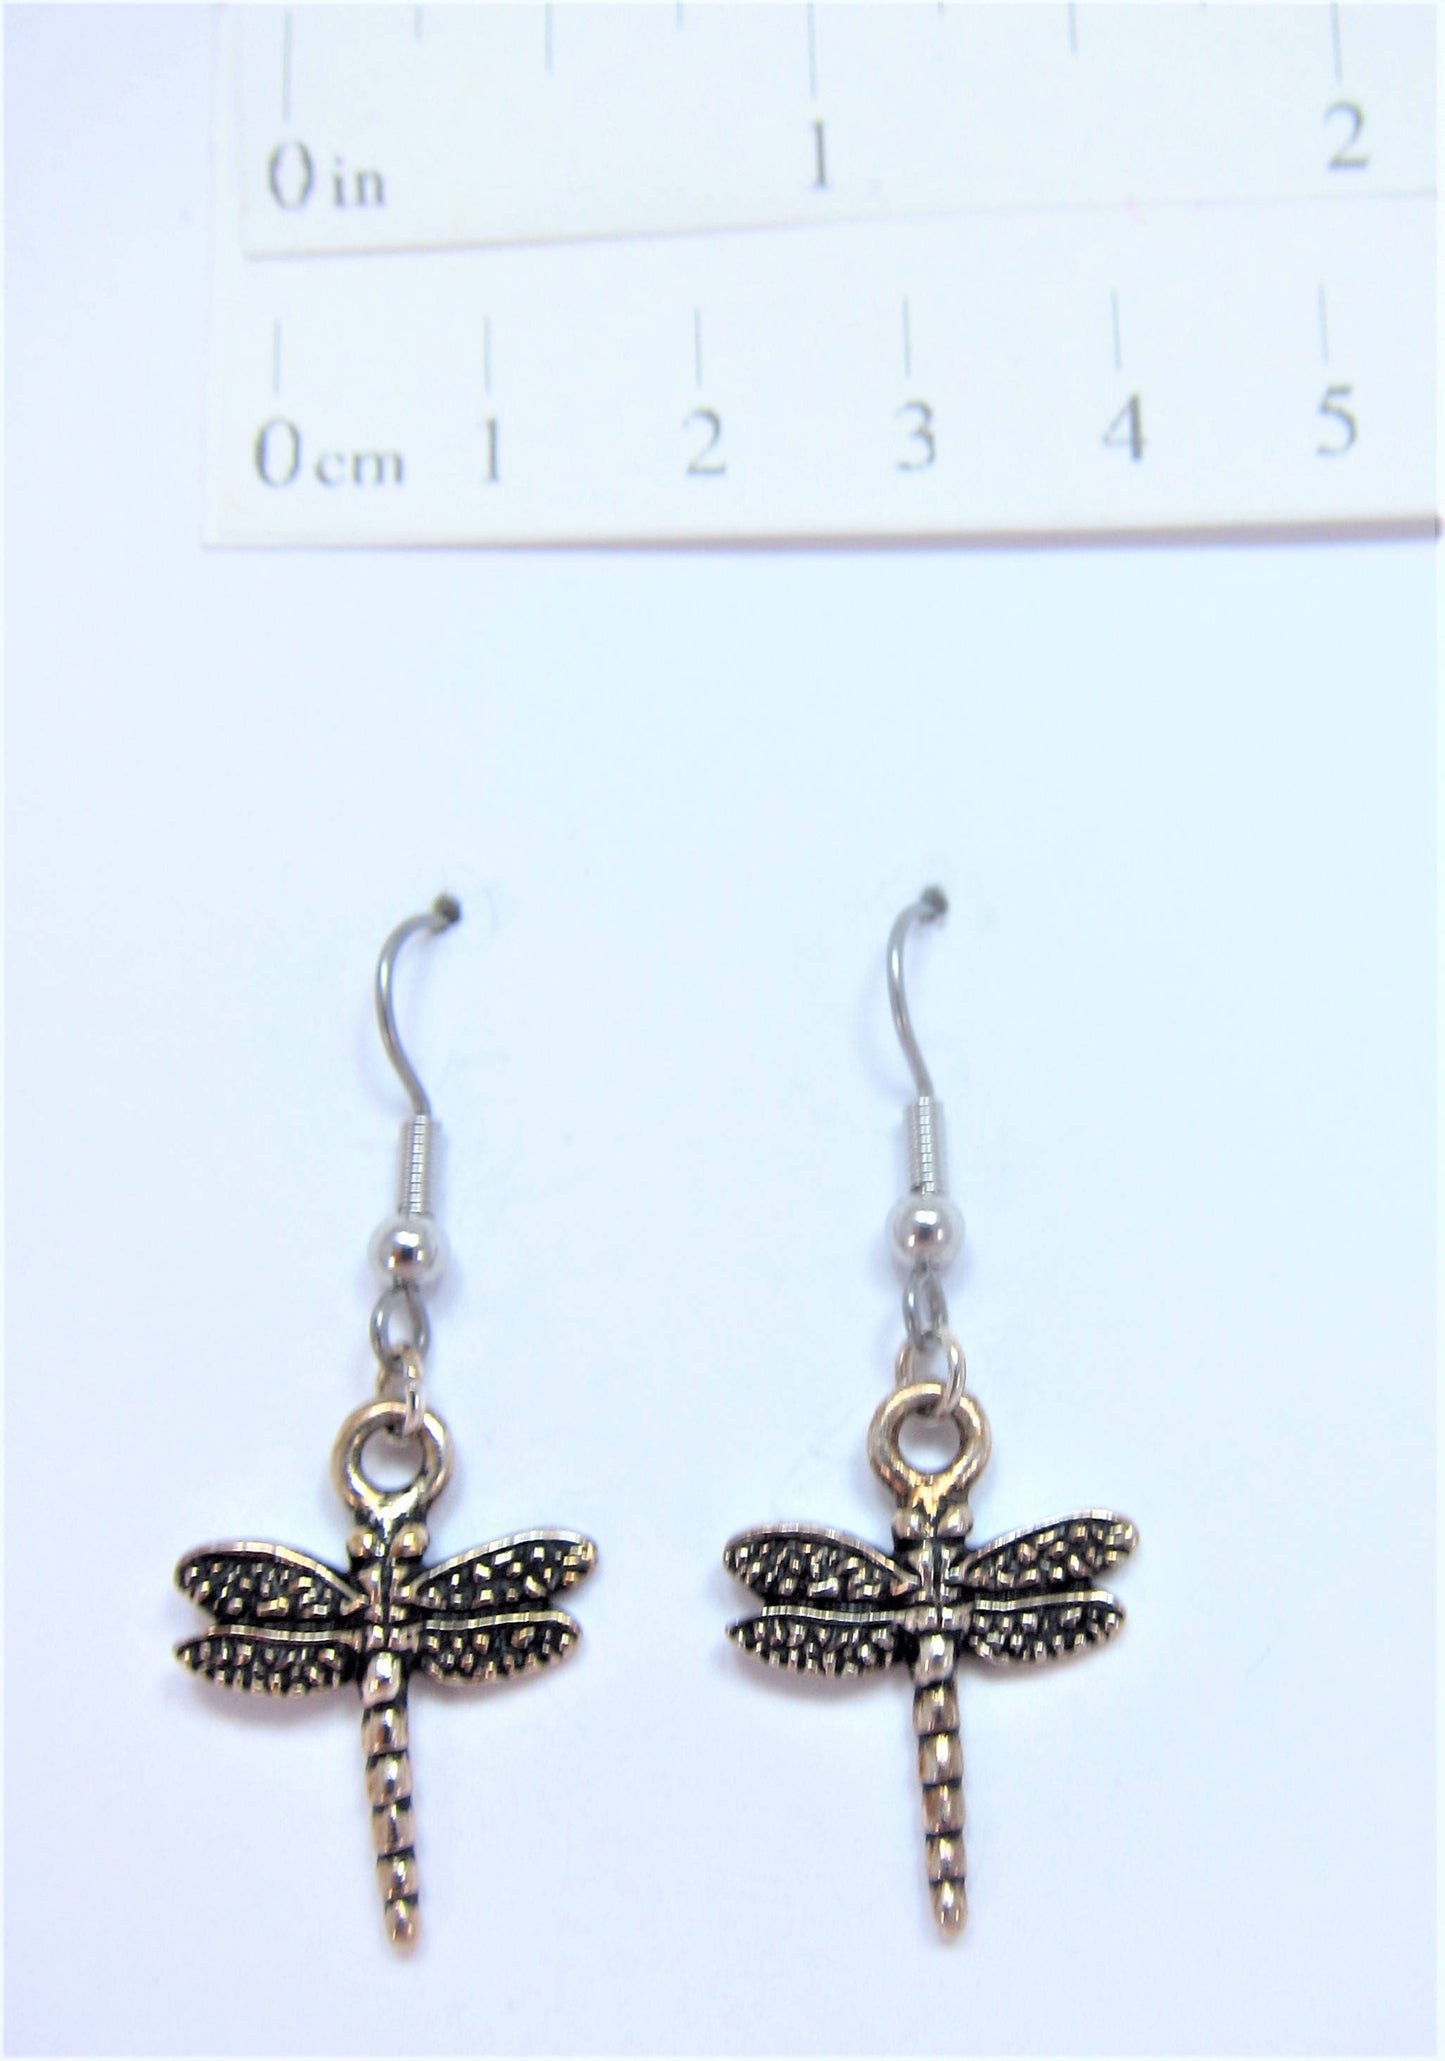 Charmed! Dragonfly earrings silver plate antique finish on hypoallergenic surgical steel hooks